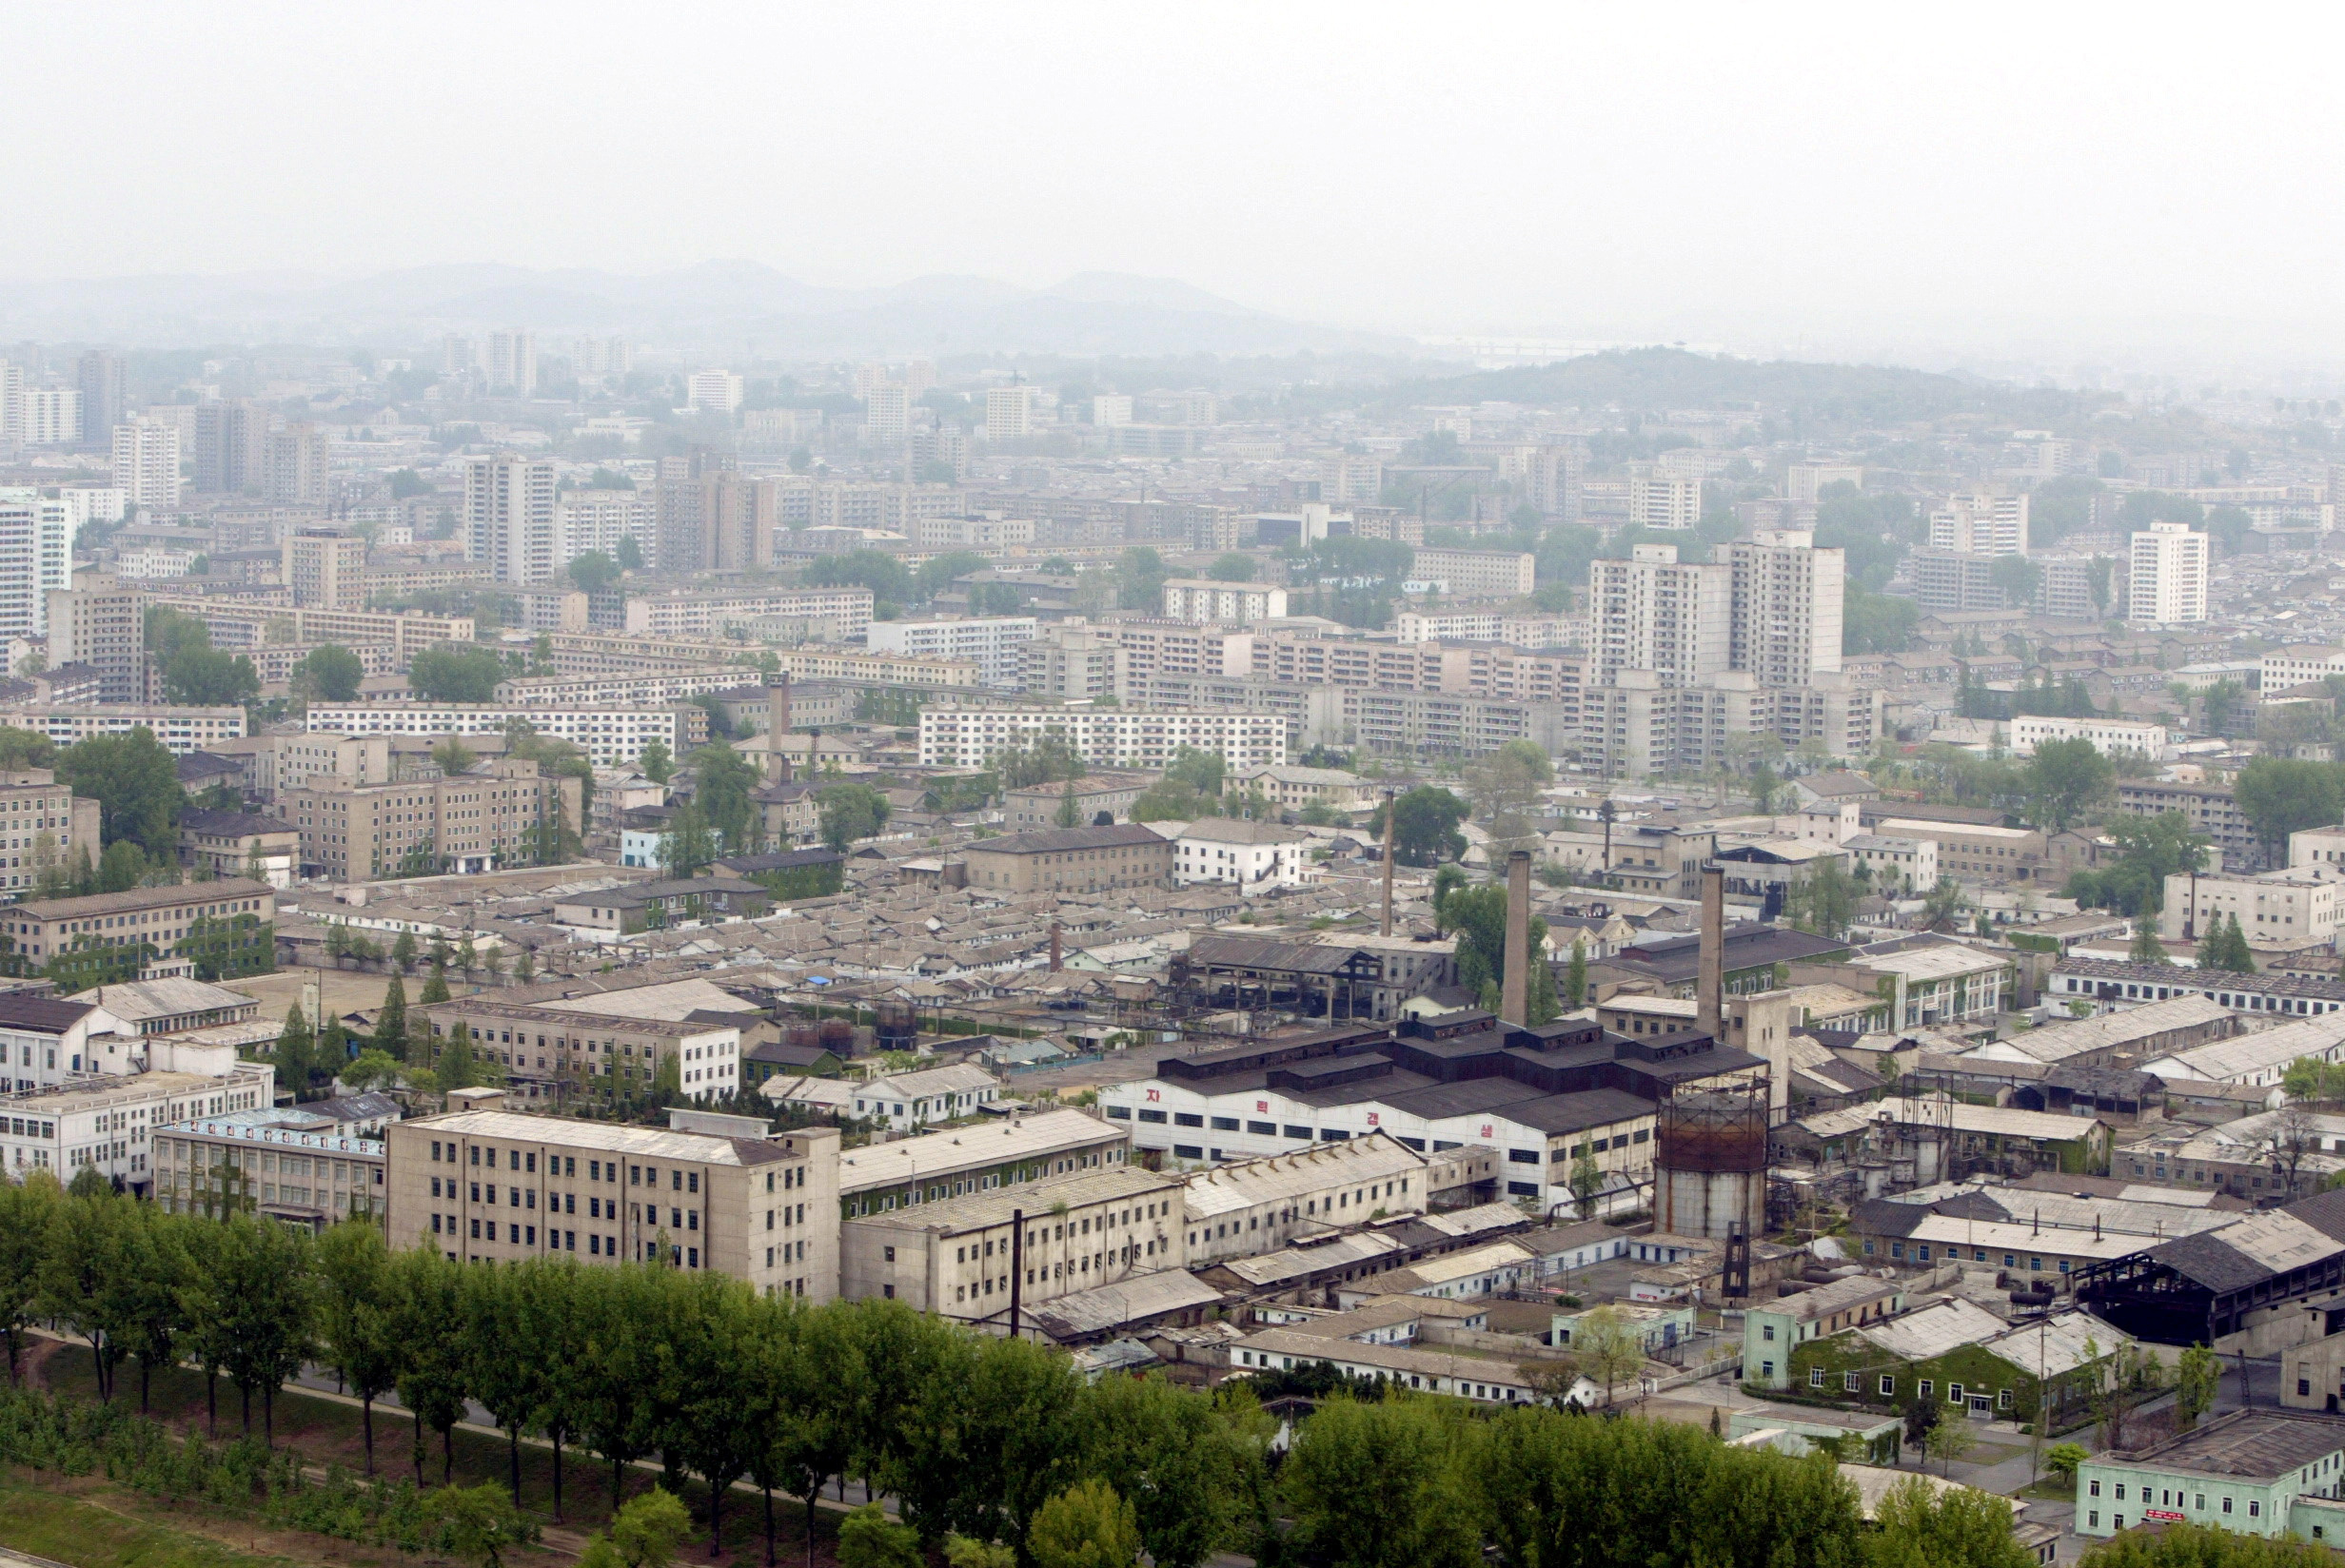 THE NORTH KOREA'S CAPITAL PYONGYANG IS SEEN IN THIS PICTURE.